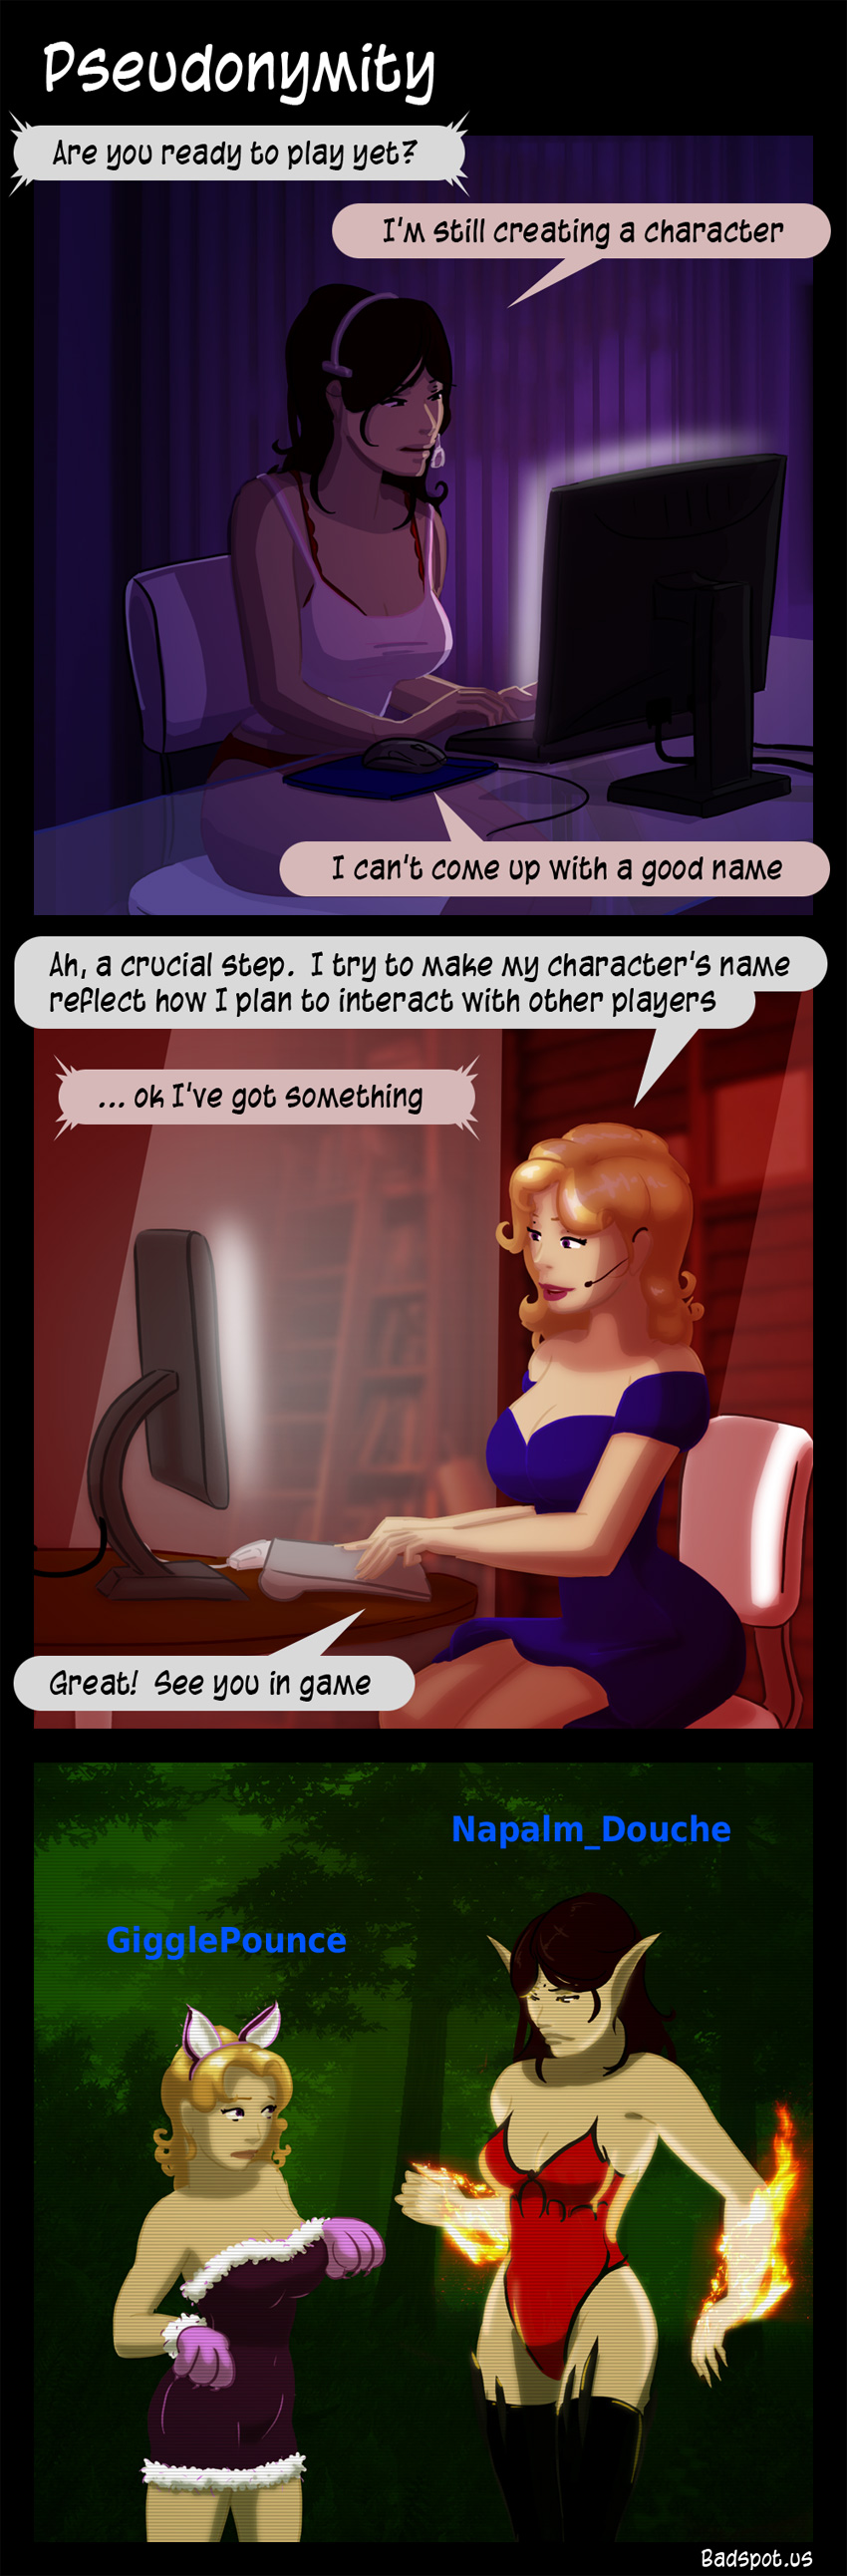 Funny Pictures go here - Page 17 Comic-Pseudonymity